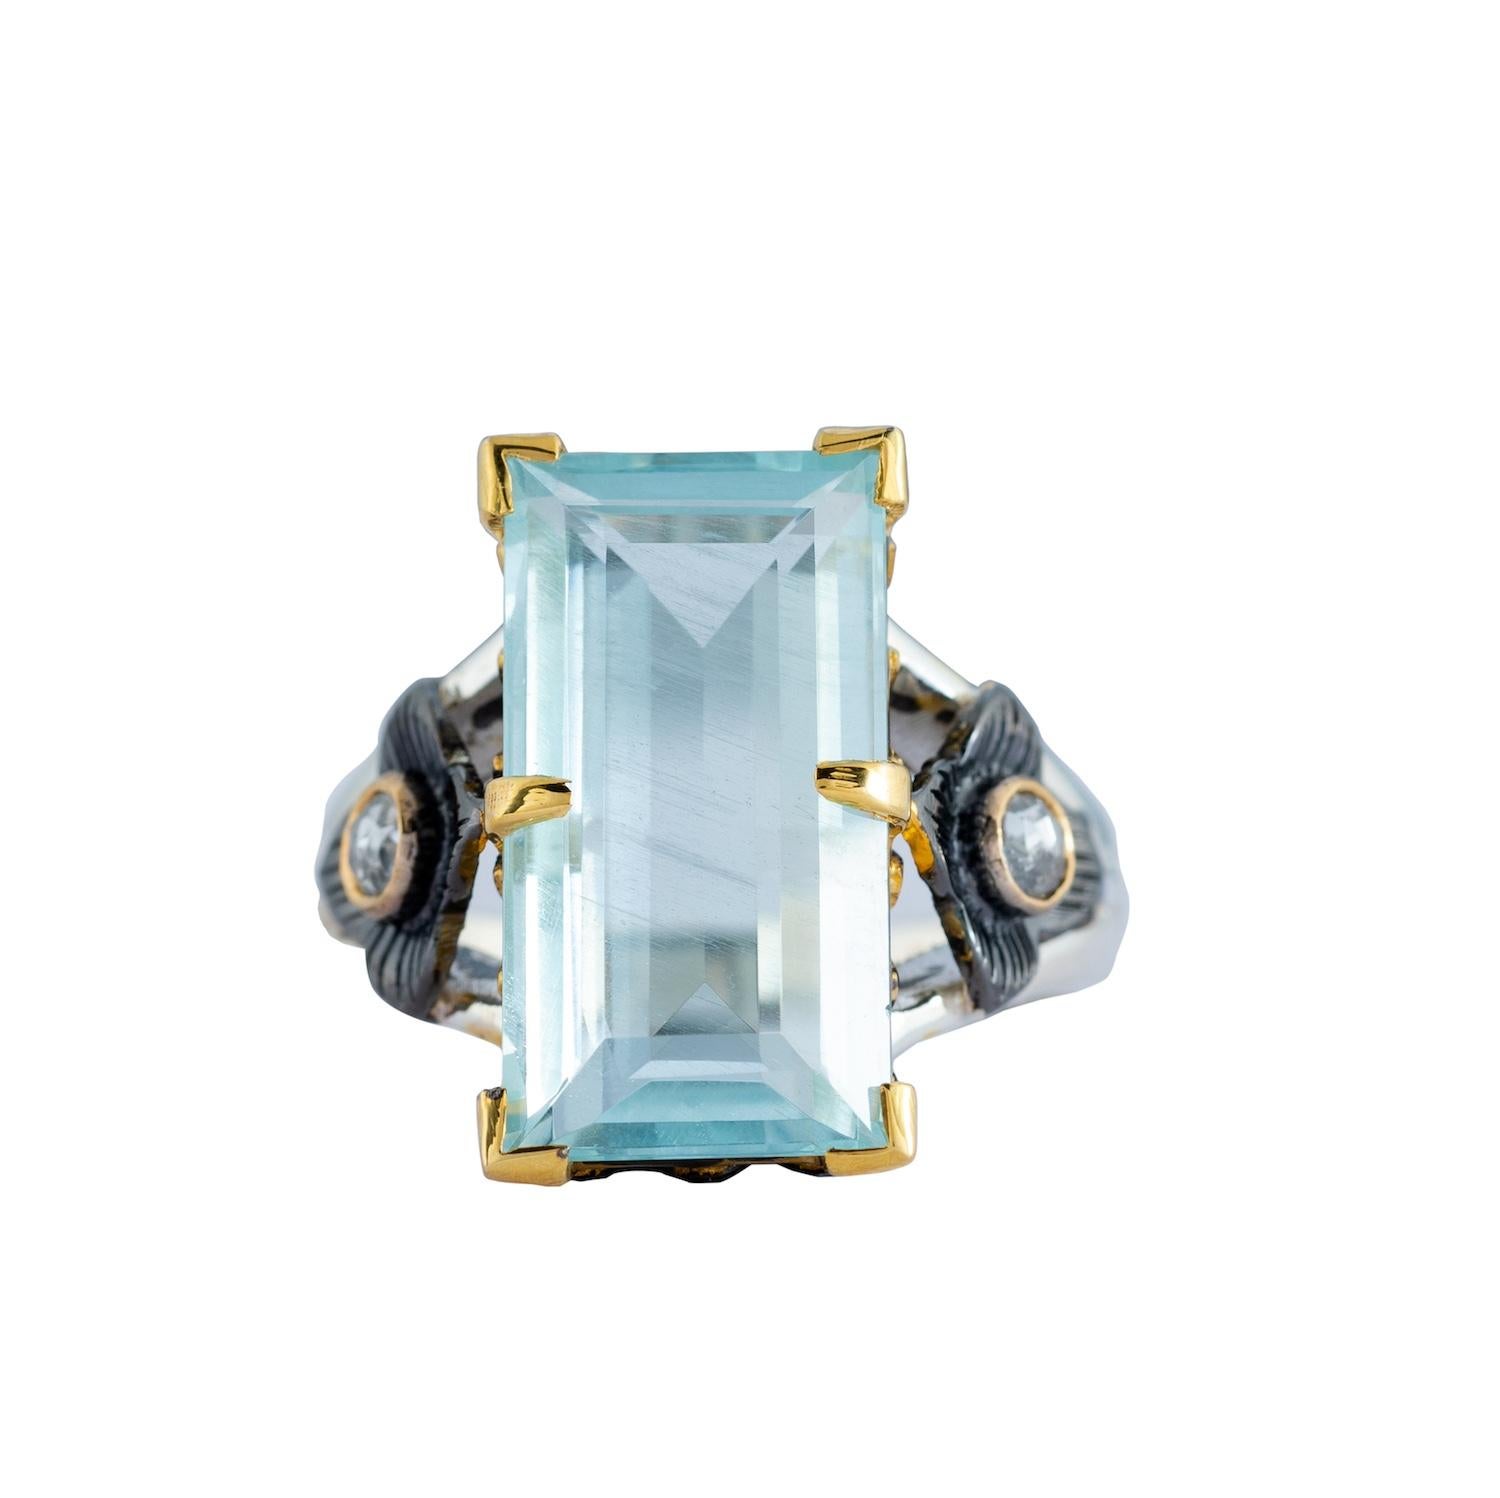 A stunning one-of-a-kind aquamarine cocktail ring which has been handmade in our workshops. This statement ring, features an 8.27ct aquamarine which is flanked by two rose cut diamonds all set in 14ct gold. The shank is made of oxidized sterling